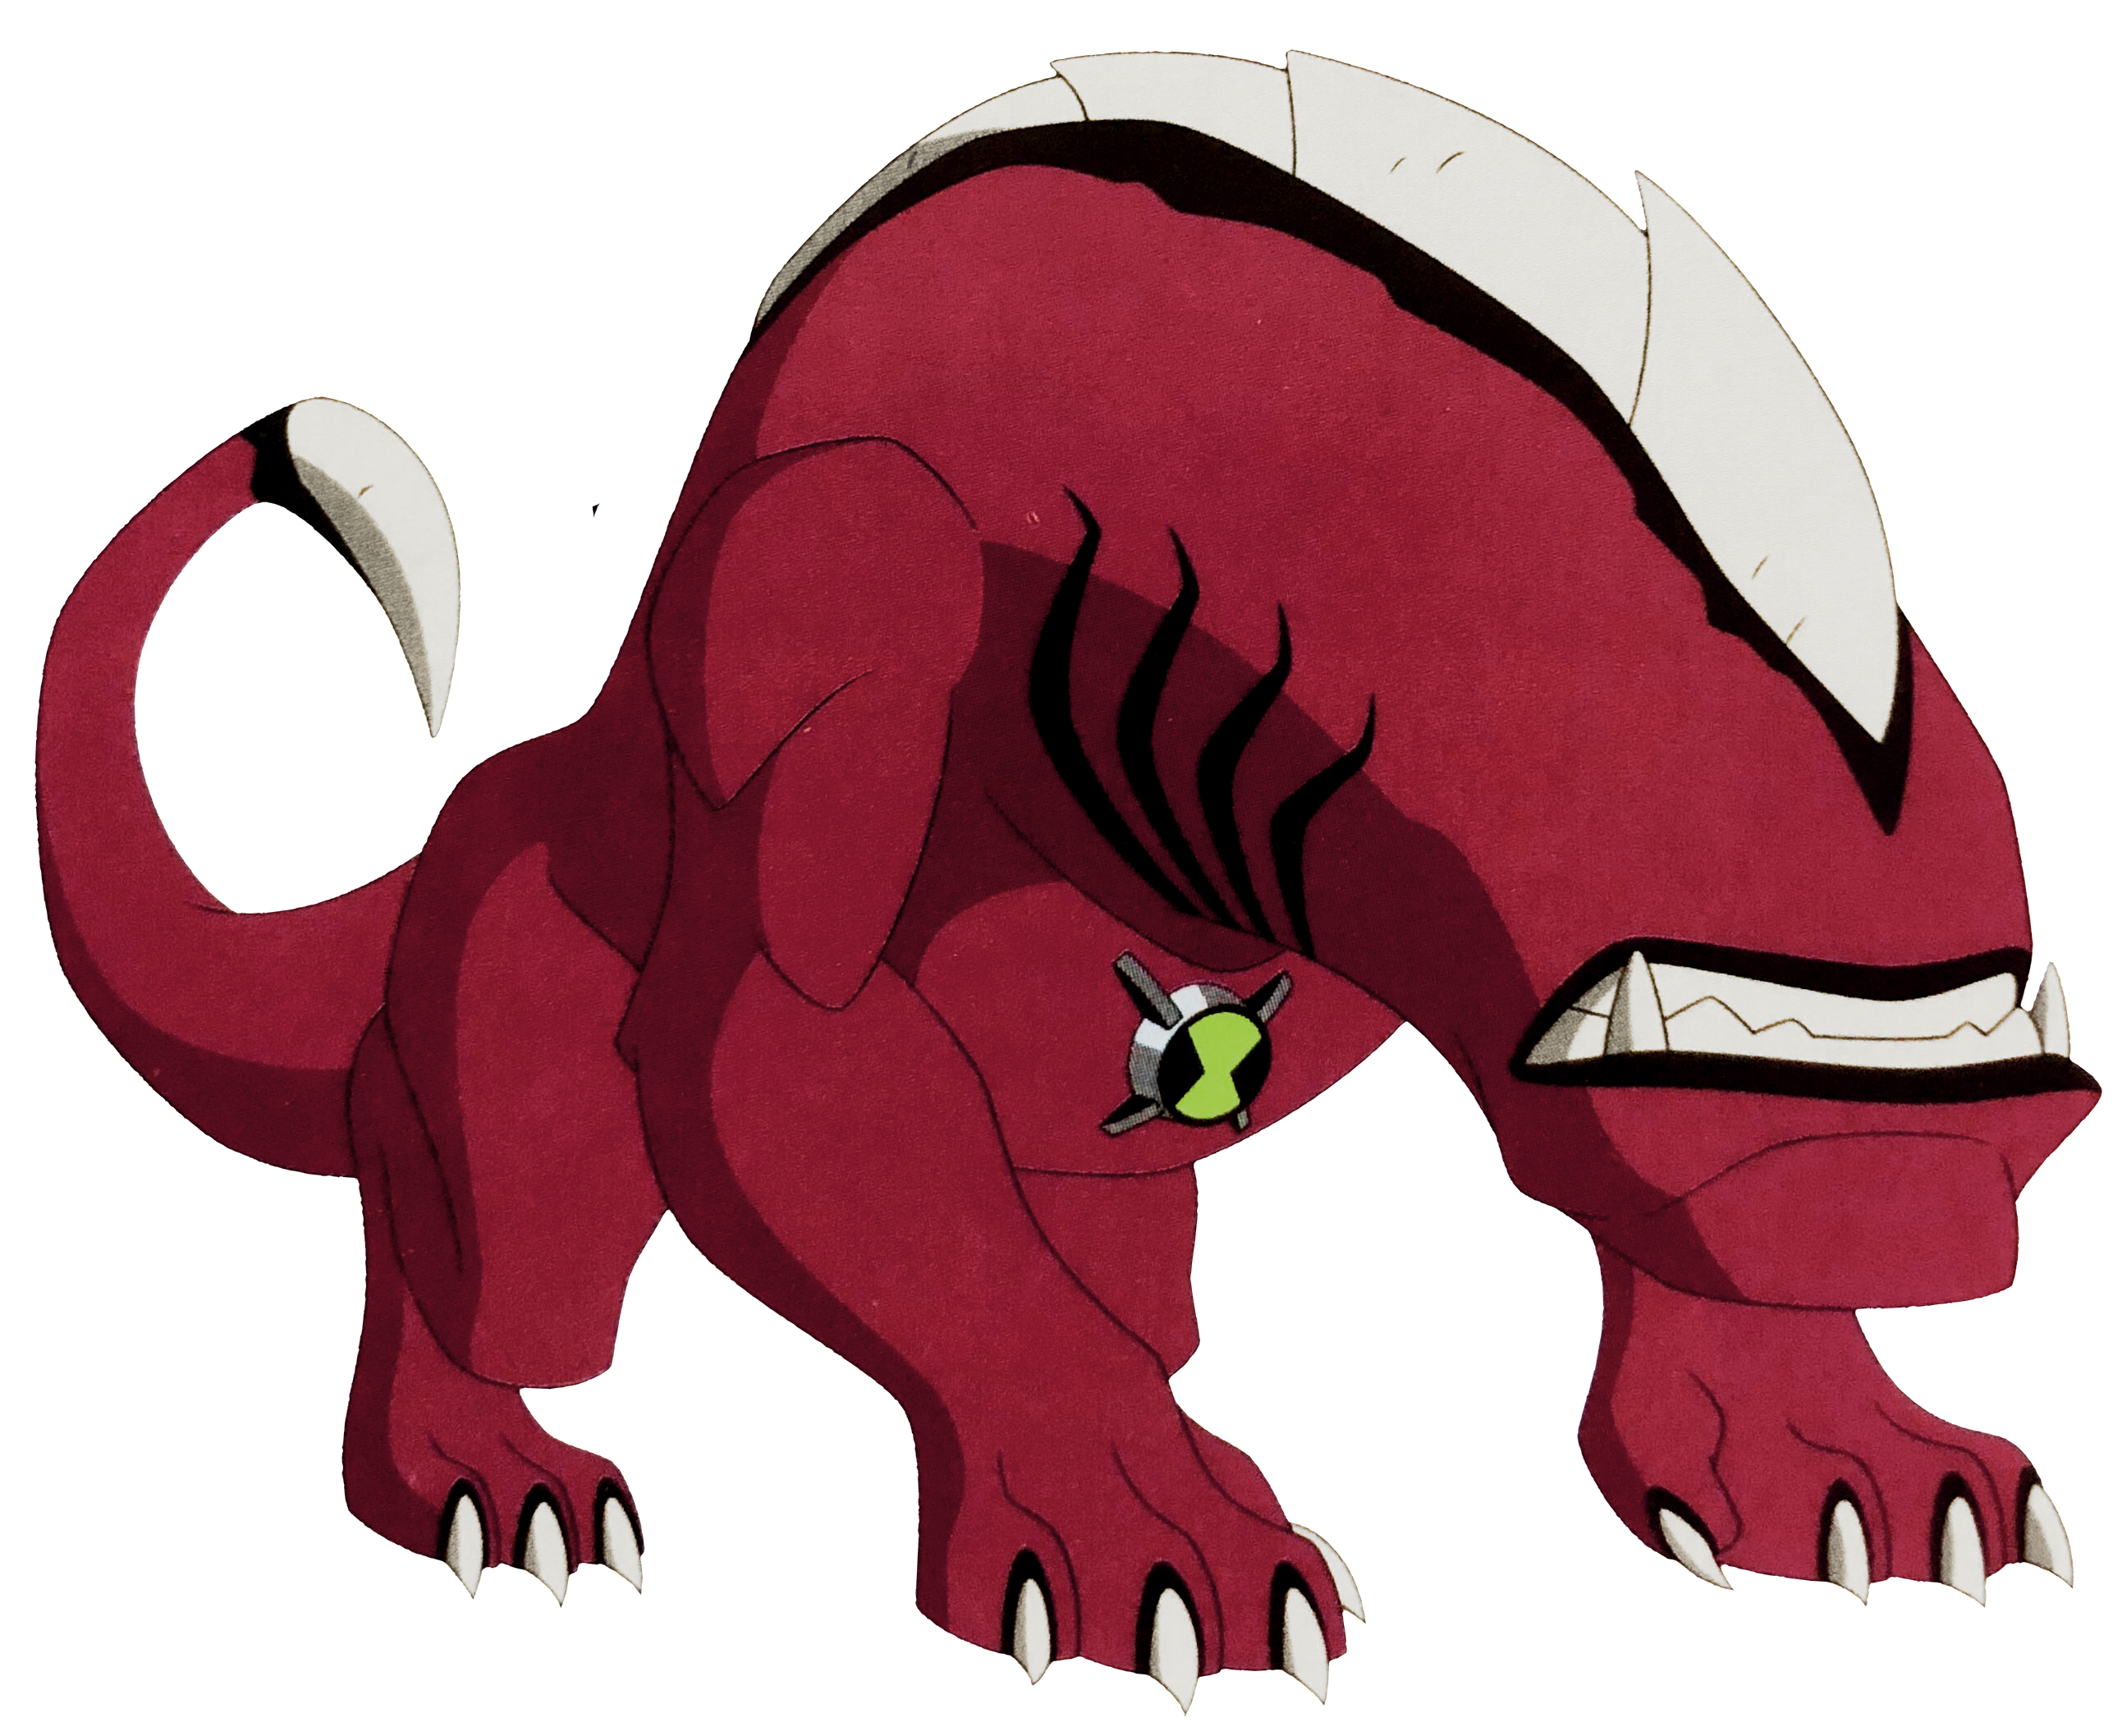 https://static.wikia.nocookie.net/ben10/images/2/2a/UltimateWildmuttOfficial.png/revision/latest?cb=20180824092906